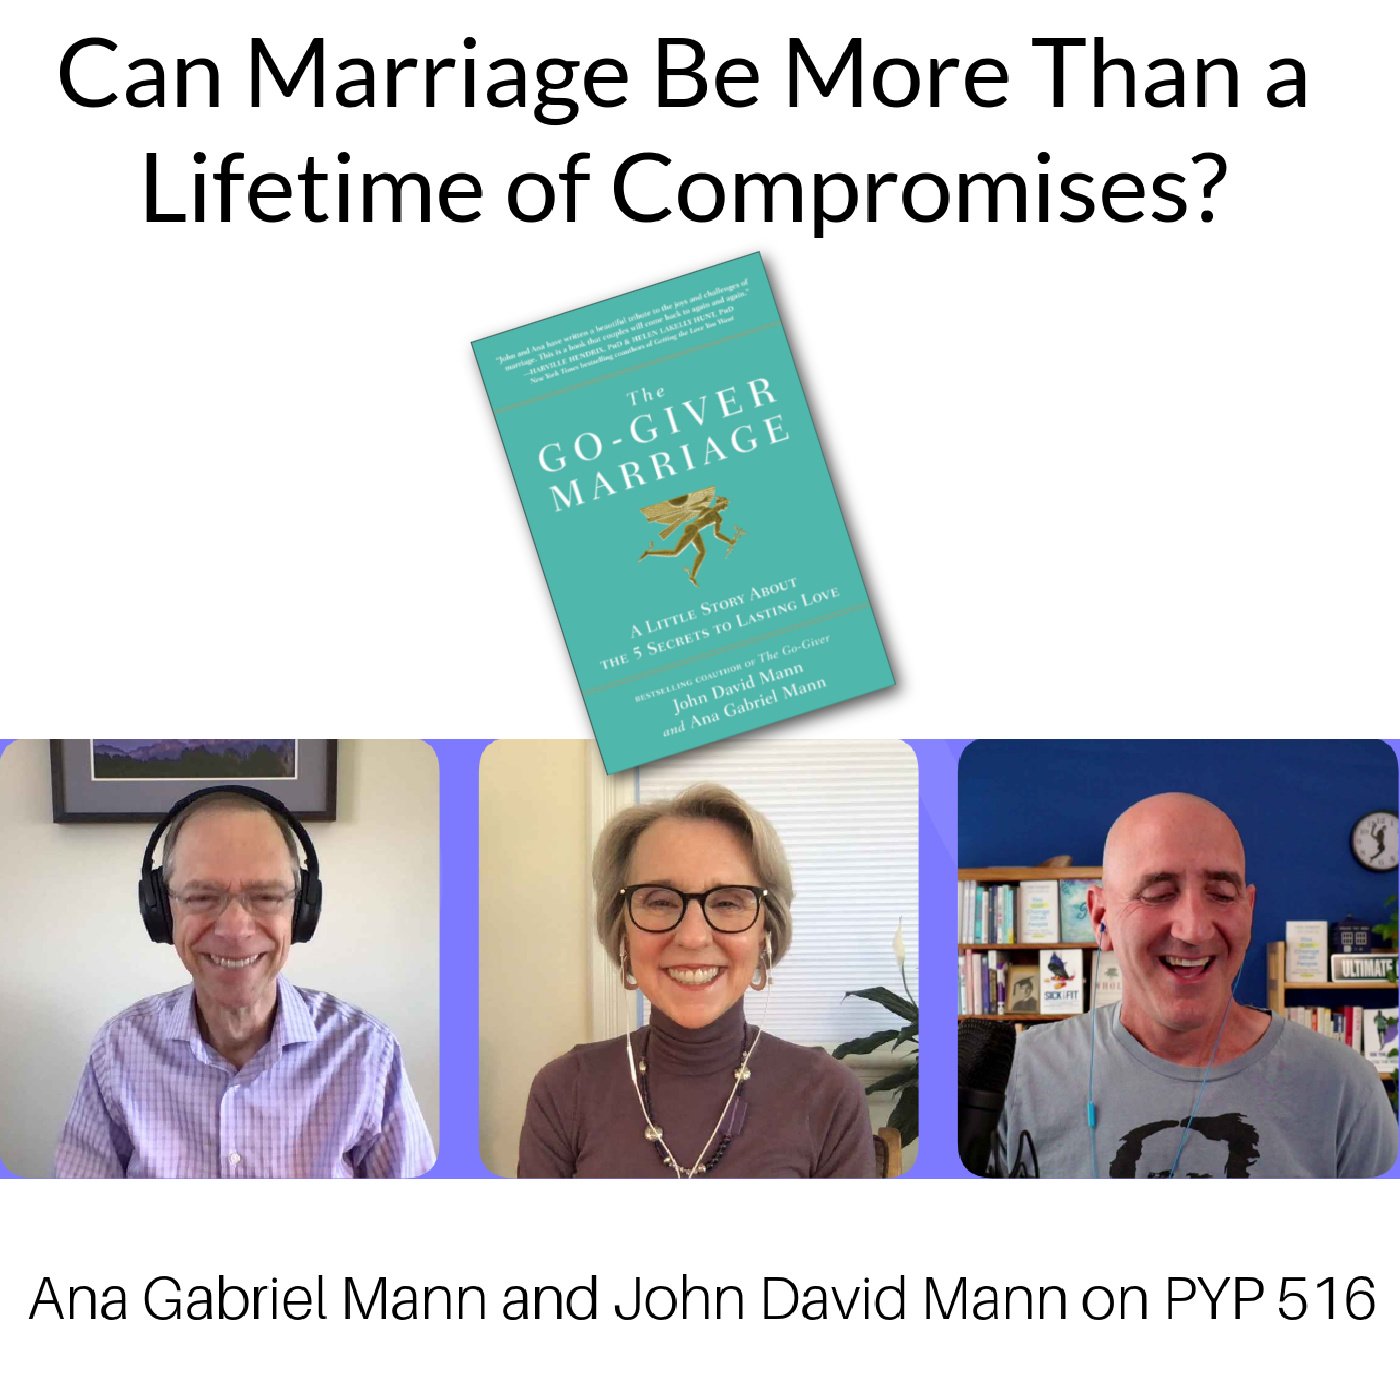 Can Marriage be More Than a Lifetime of Compromises? Ana Gabriel Mann & John David Mann on PYP 516